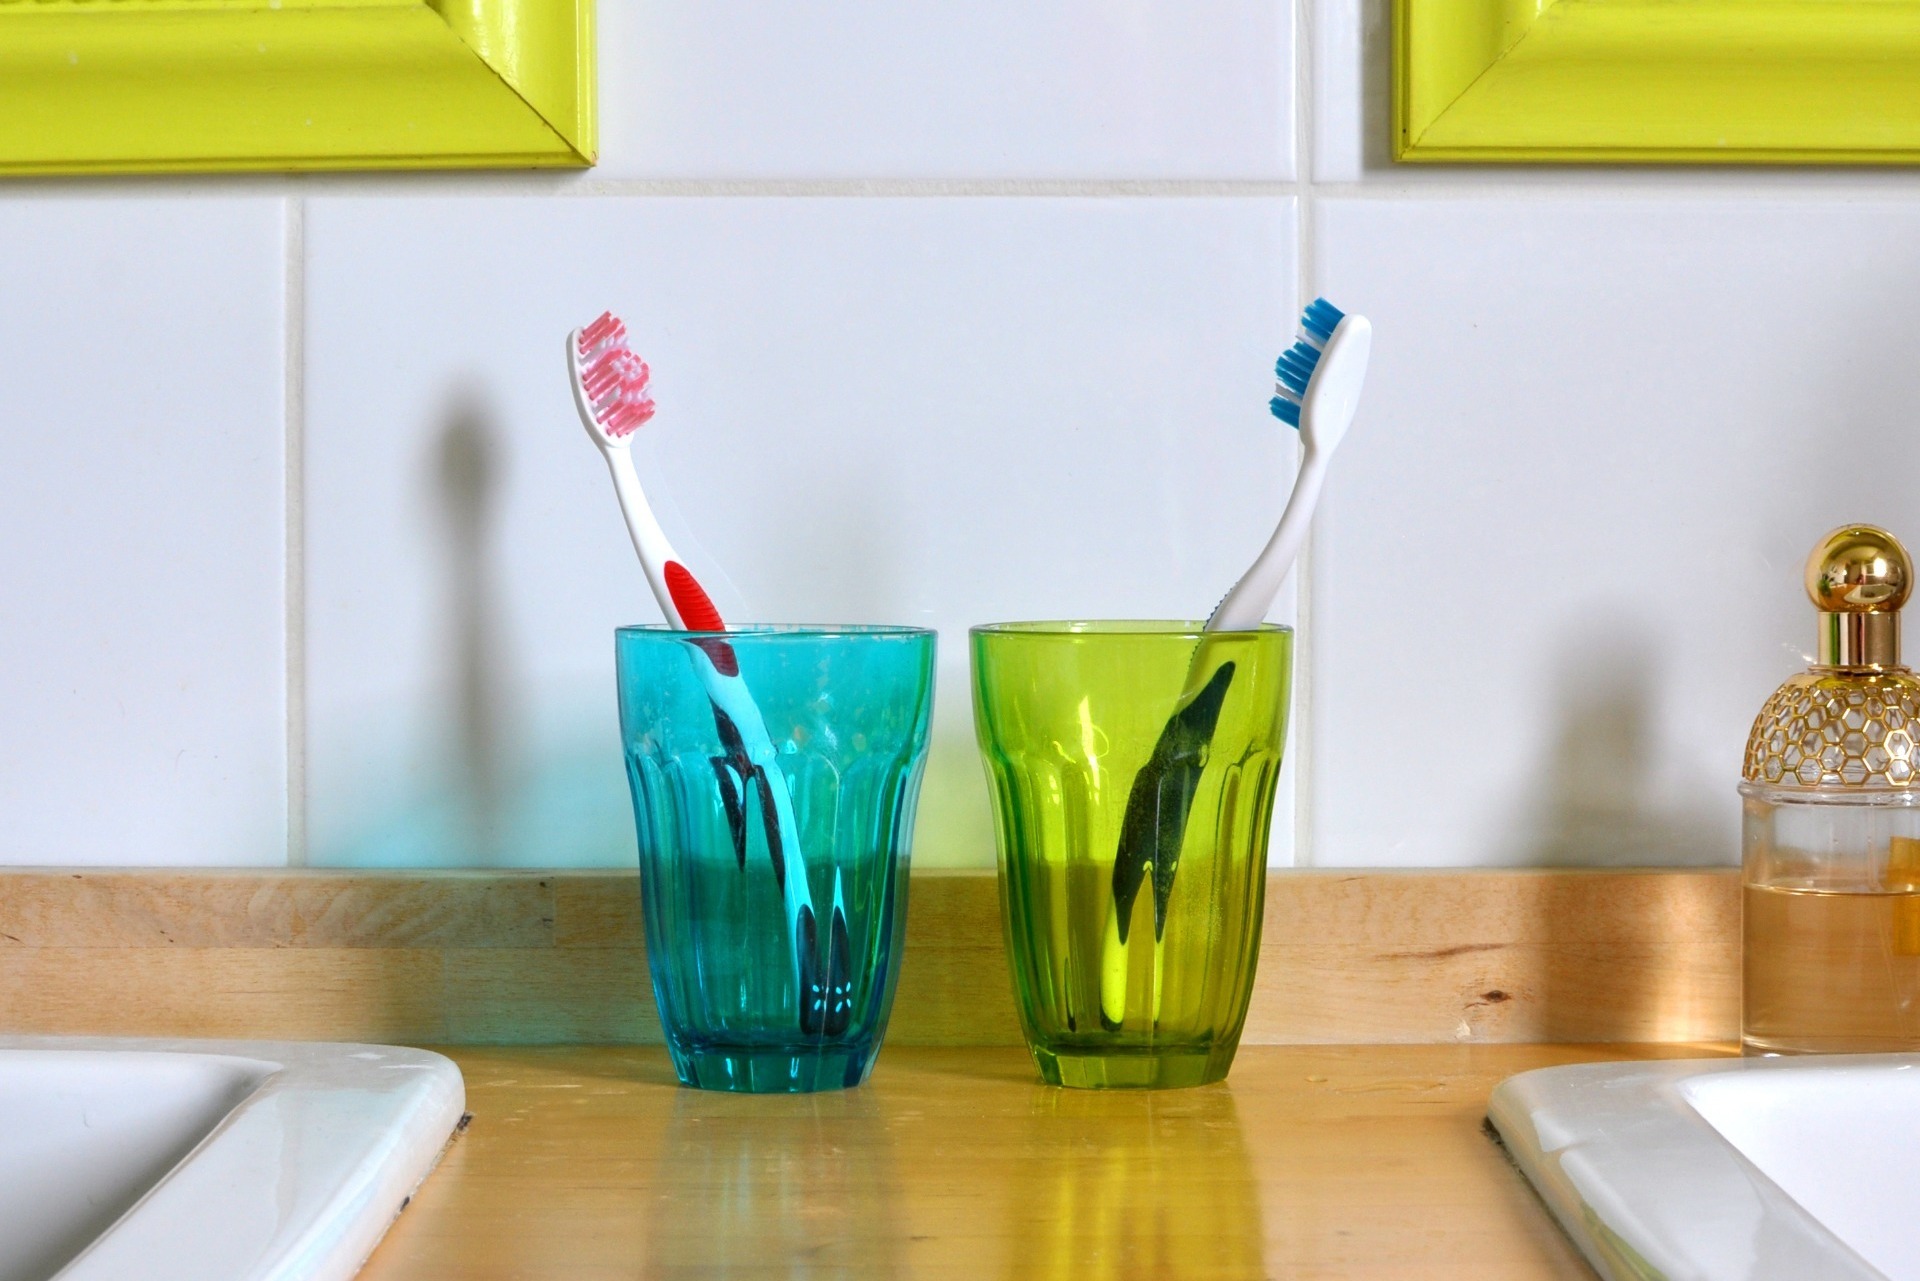 Two toothbrush holders with a toothbrush in each holder.